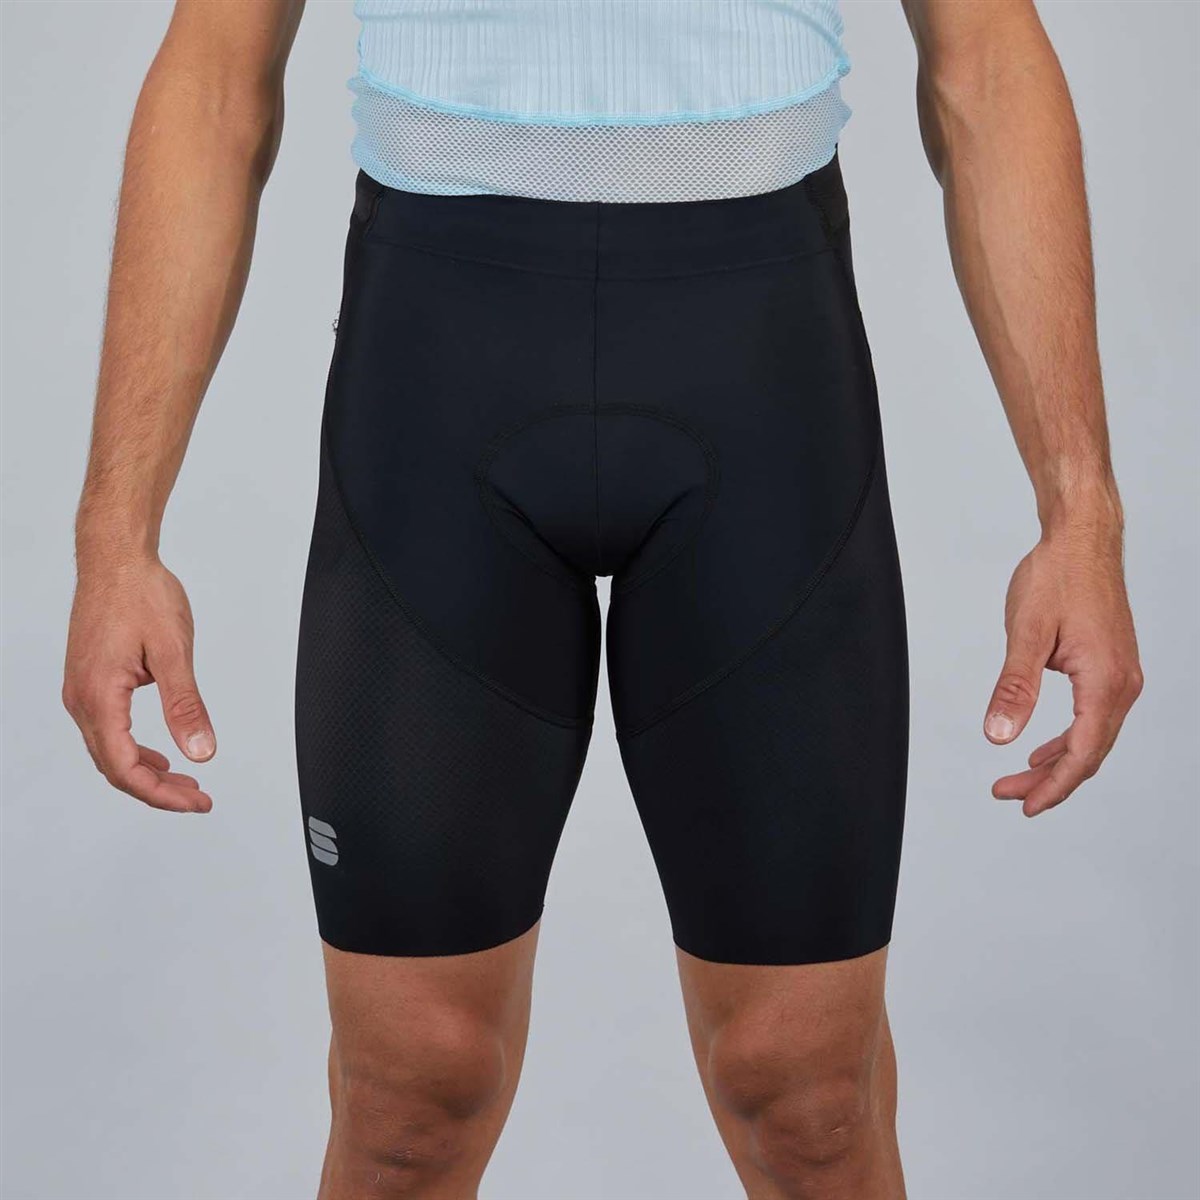 Sportful In Liner Cycling Under Shorts product image